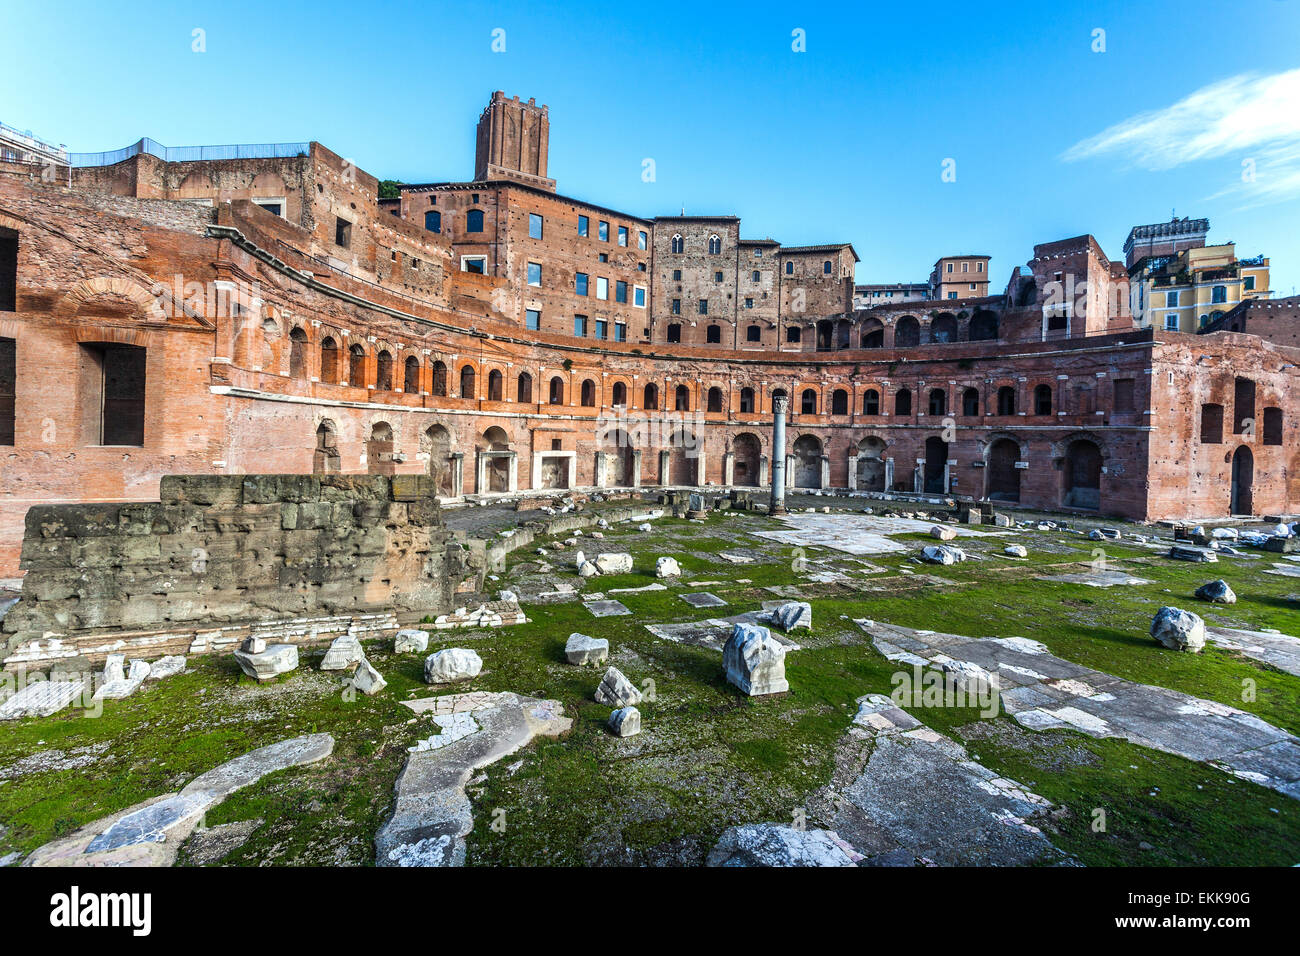 Foro di Augusto, Rome, Italie. Banque D'Images